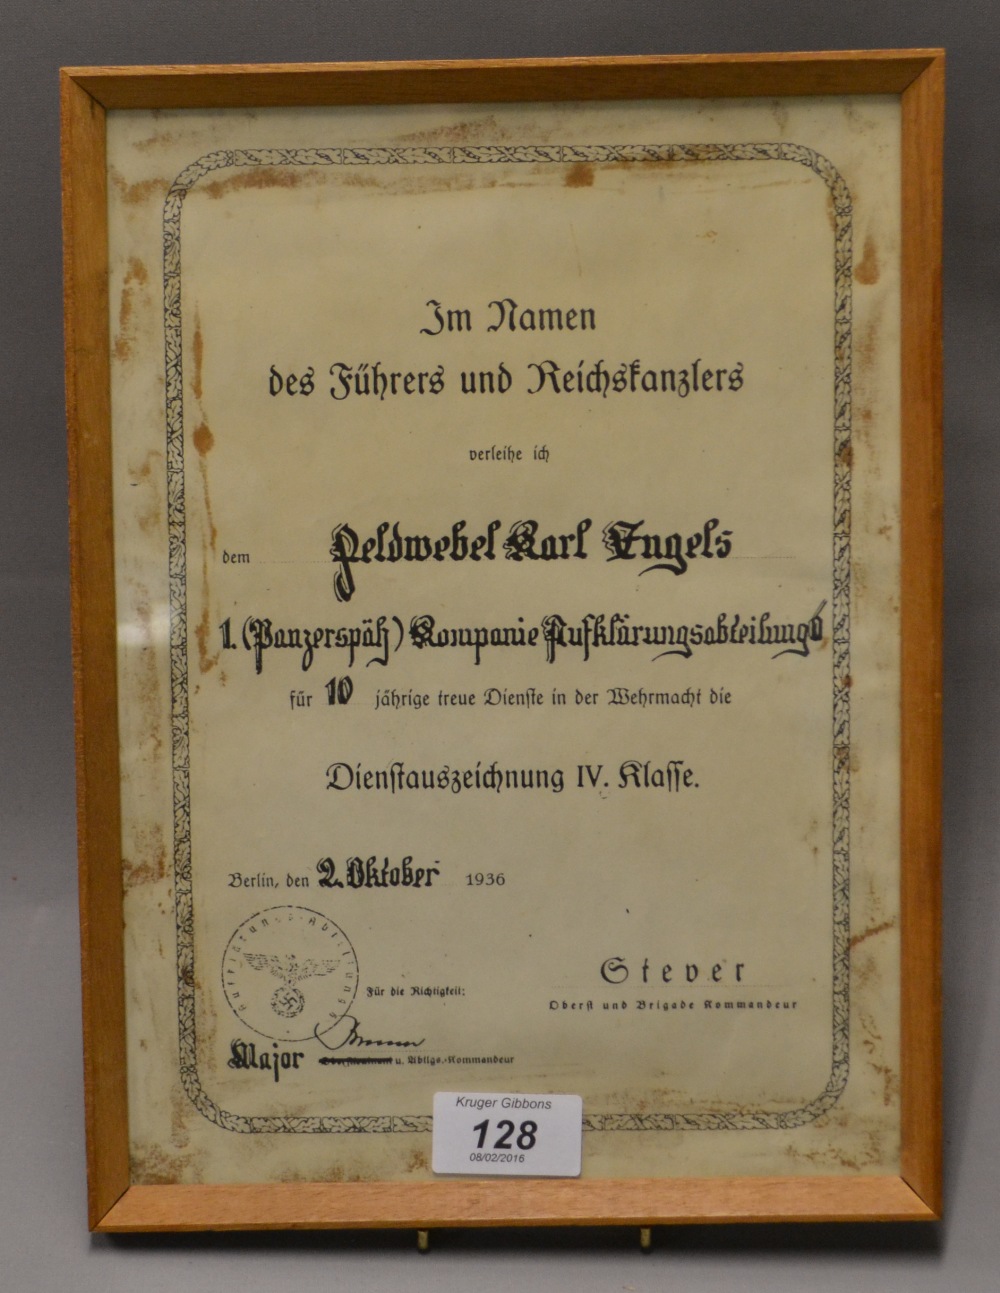 A medal-certificate for the four-year se